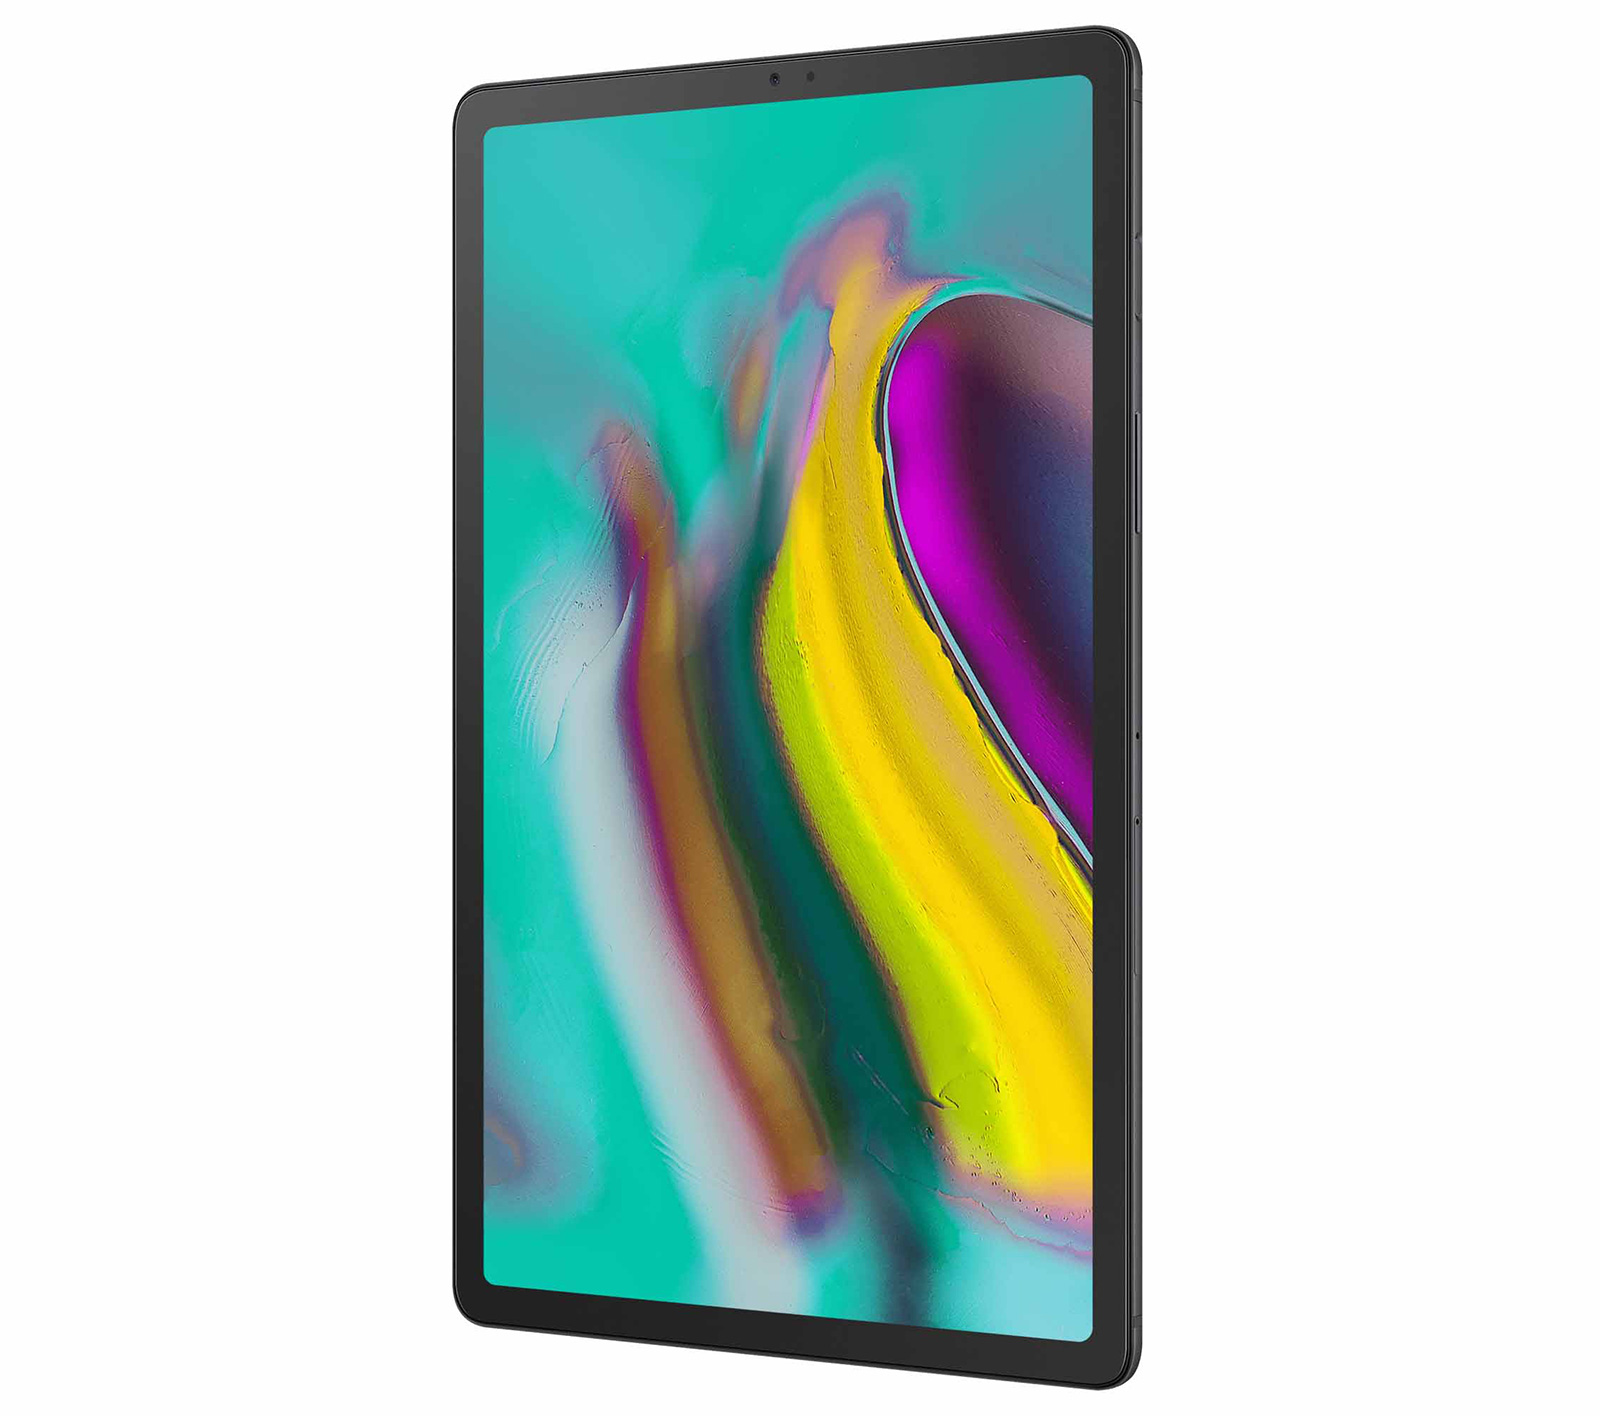 Samsung unexpectedly introduced a new tablet